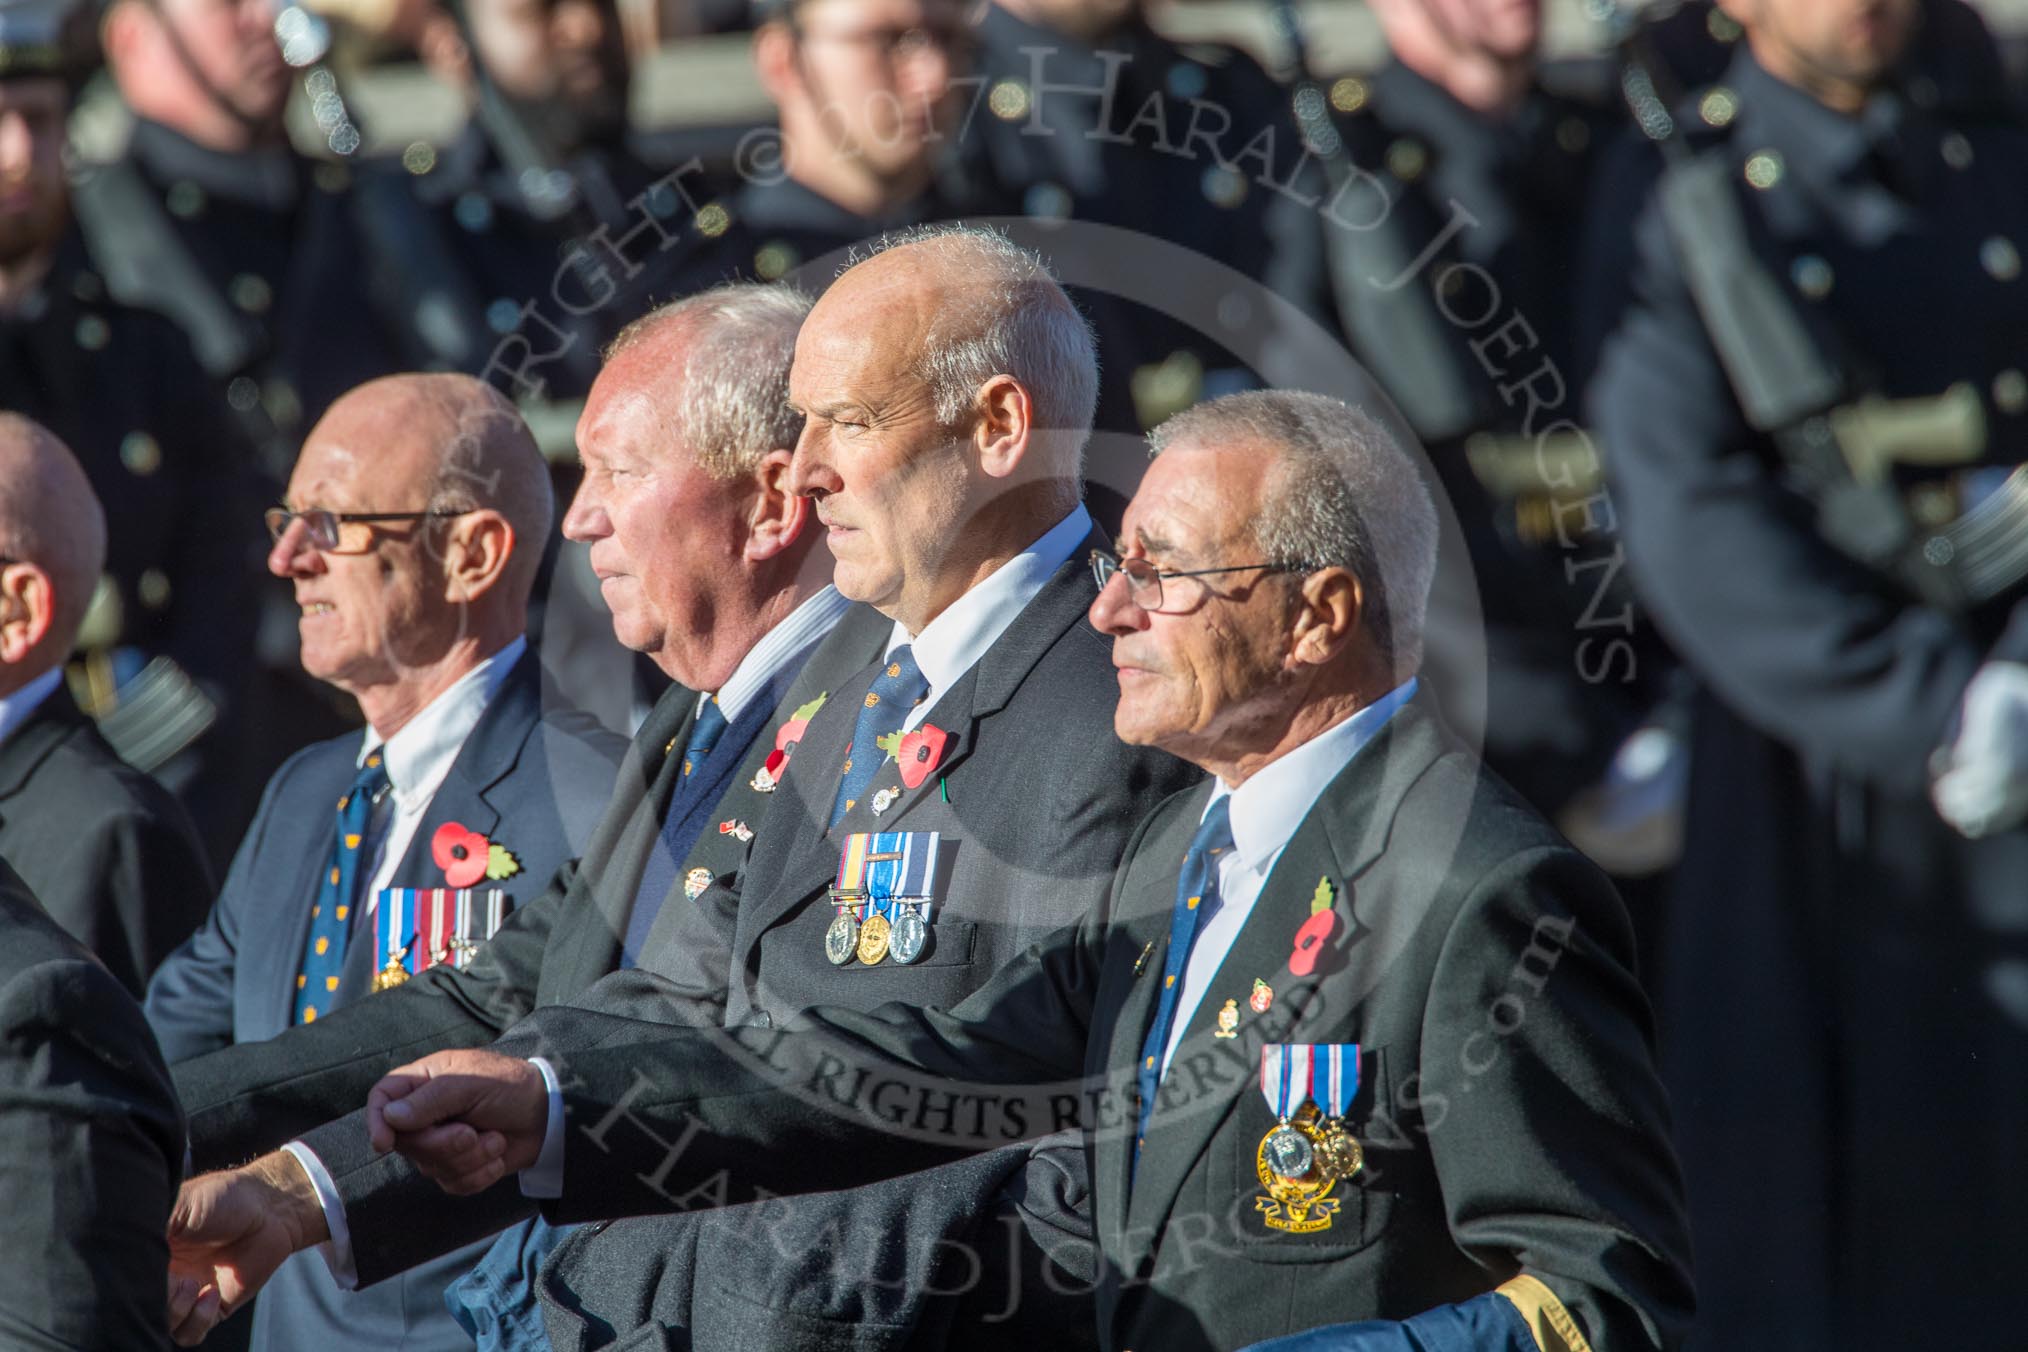 Association  OF Royal Yachtsmen (Group E39, 32 members) during the Royal British Legion March Past on Remembrance Sunday at the Cenotaph, Whitehall, Westminster, London, 11 November 2018, 11:46.